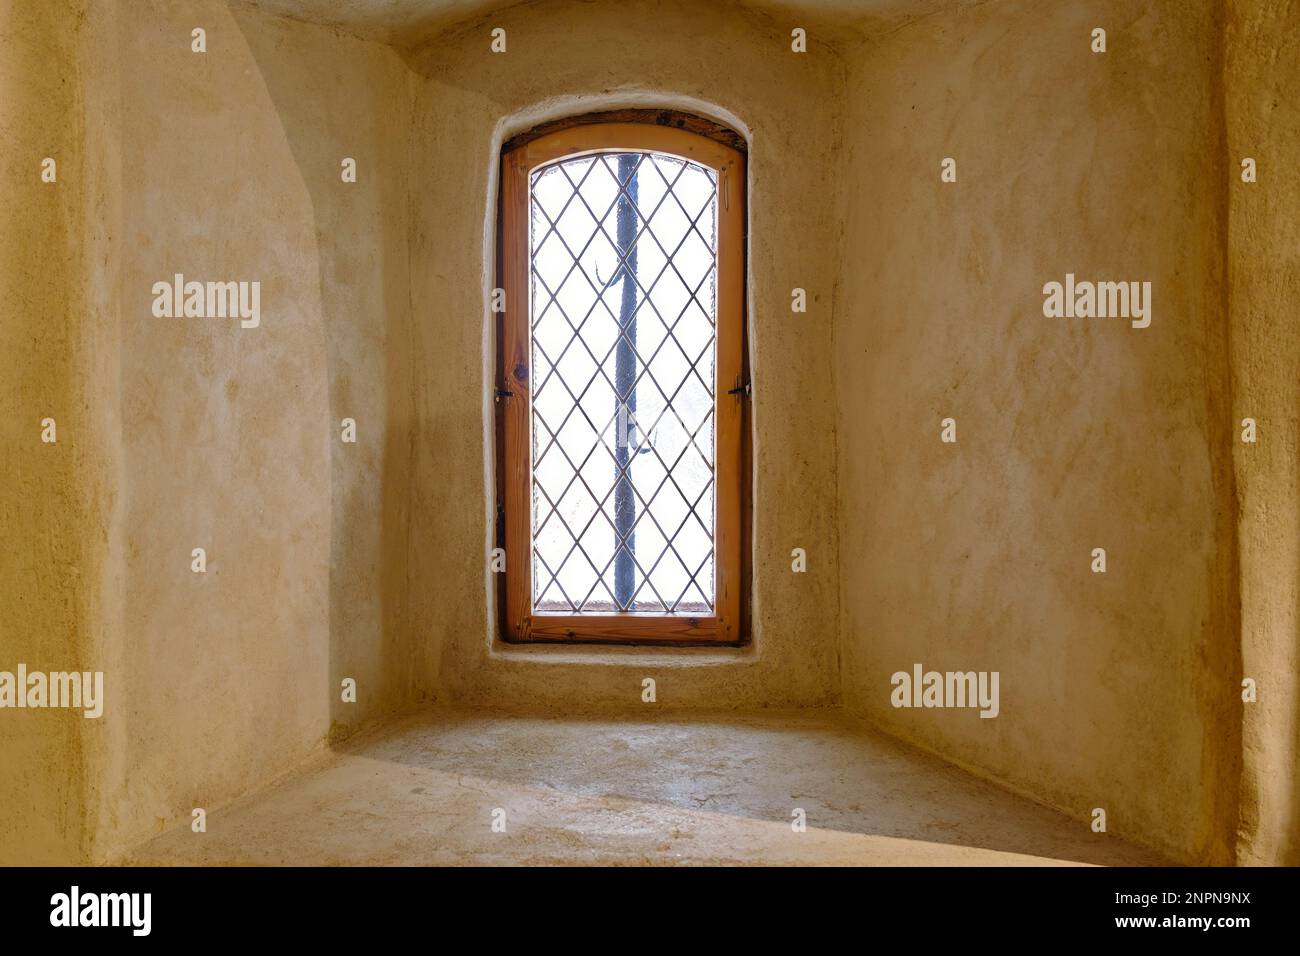 Old window from interior of a medieval castle. Stock Photo